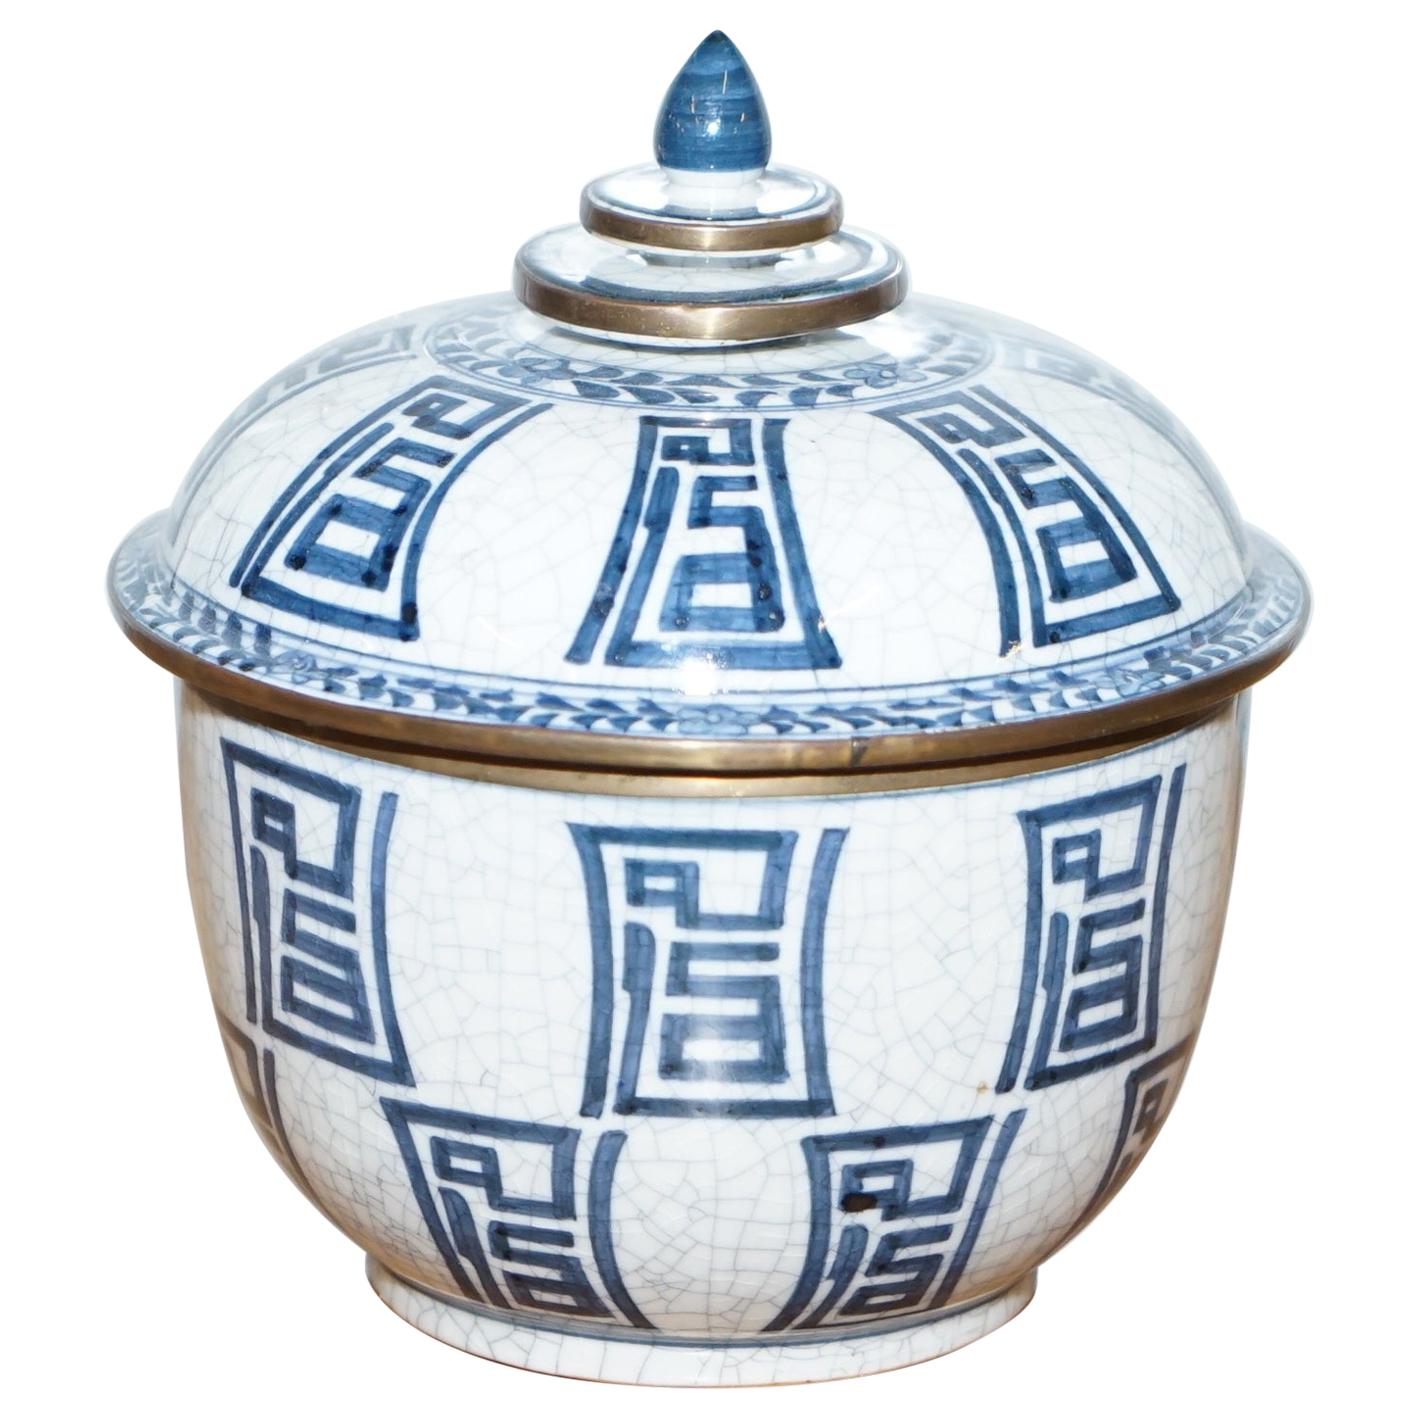 Stunning Vintage Chinese Porcelain Pot with Lid Stamped to the Base Decorative